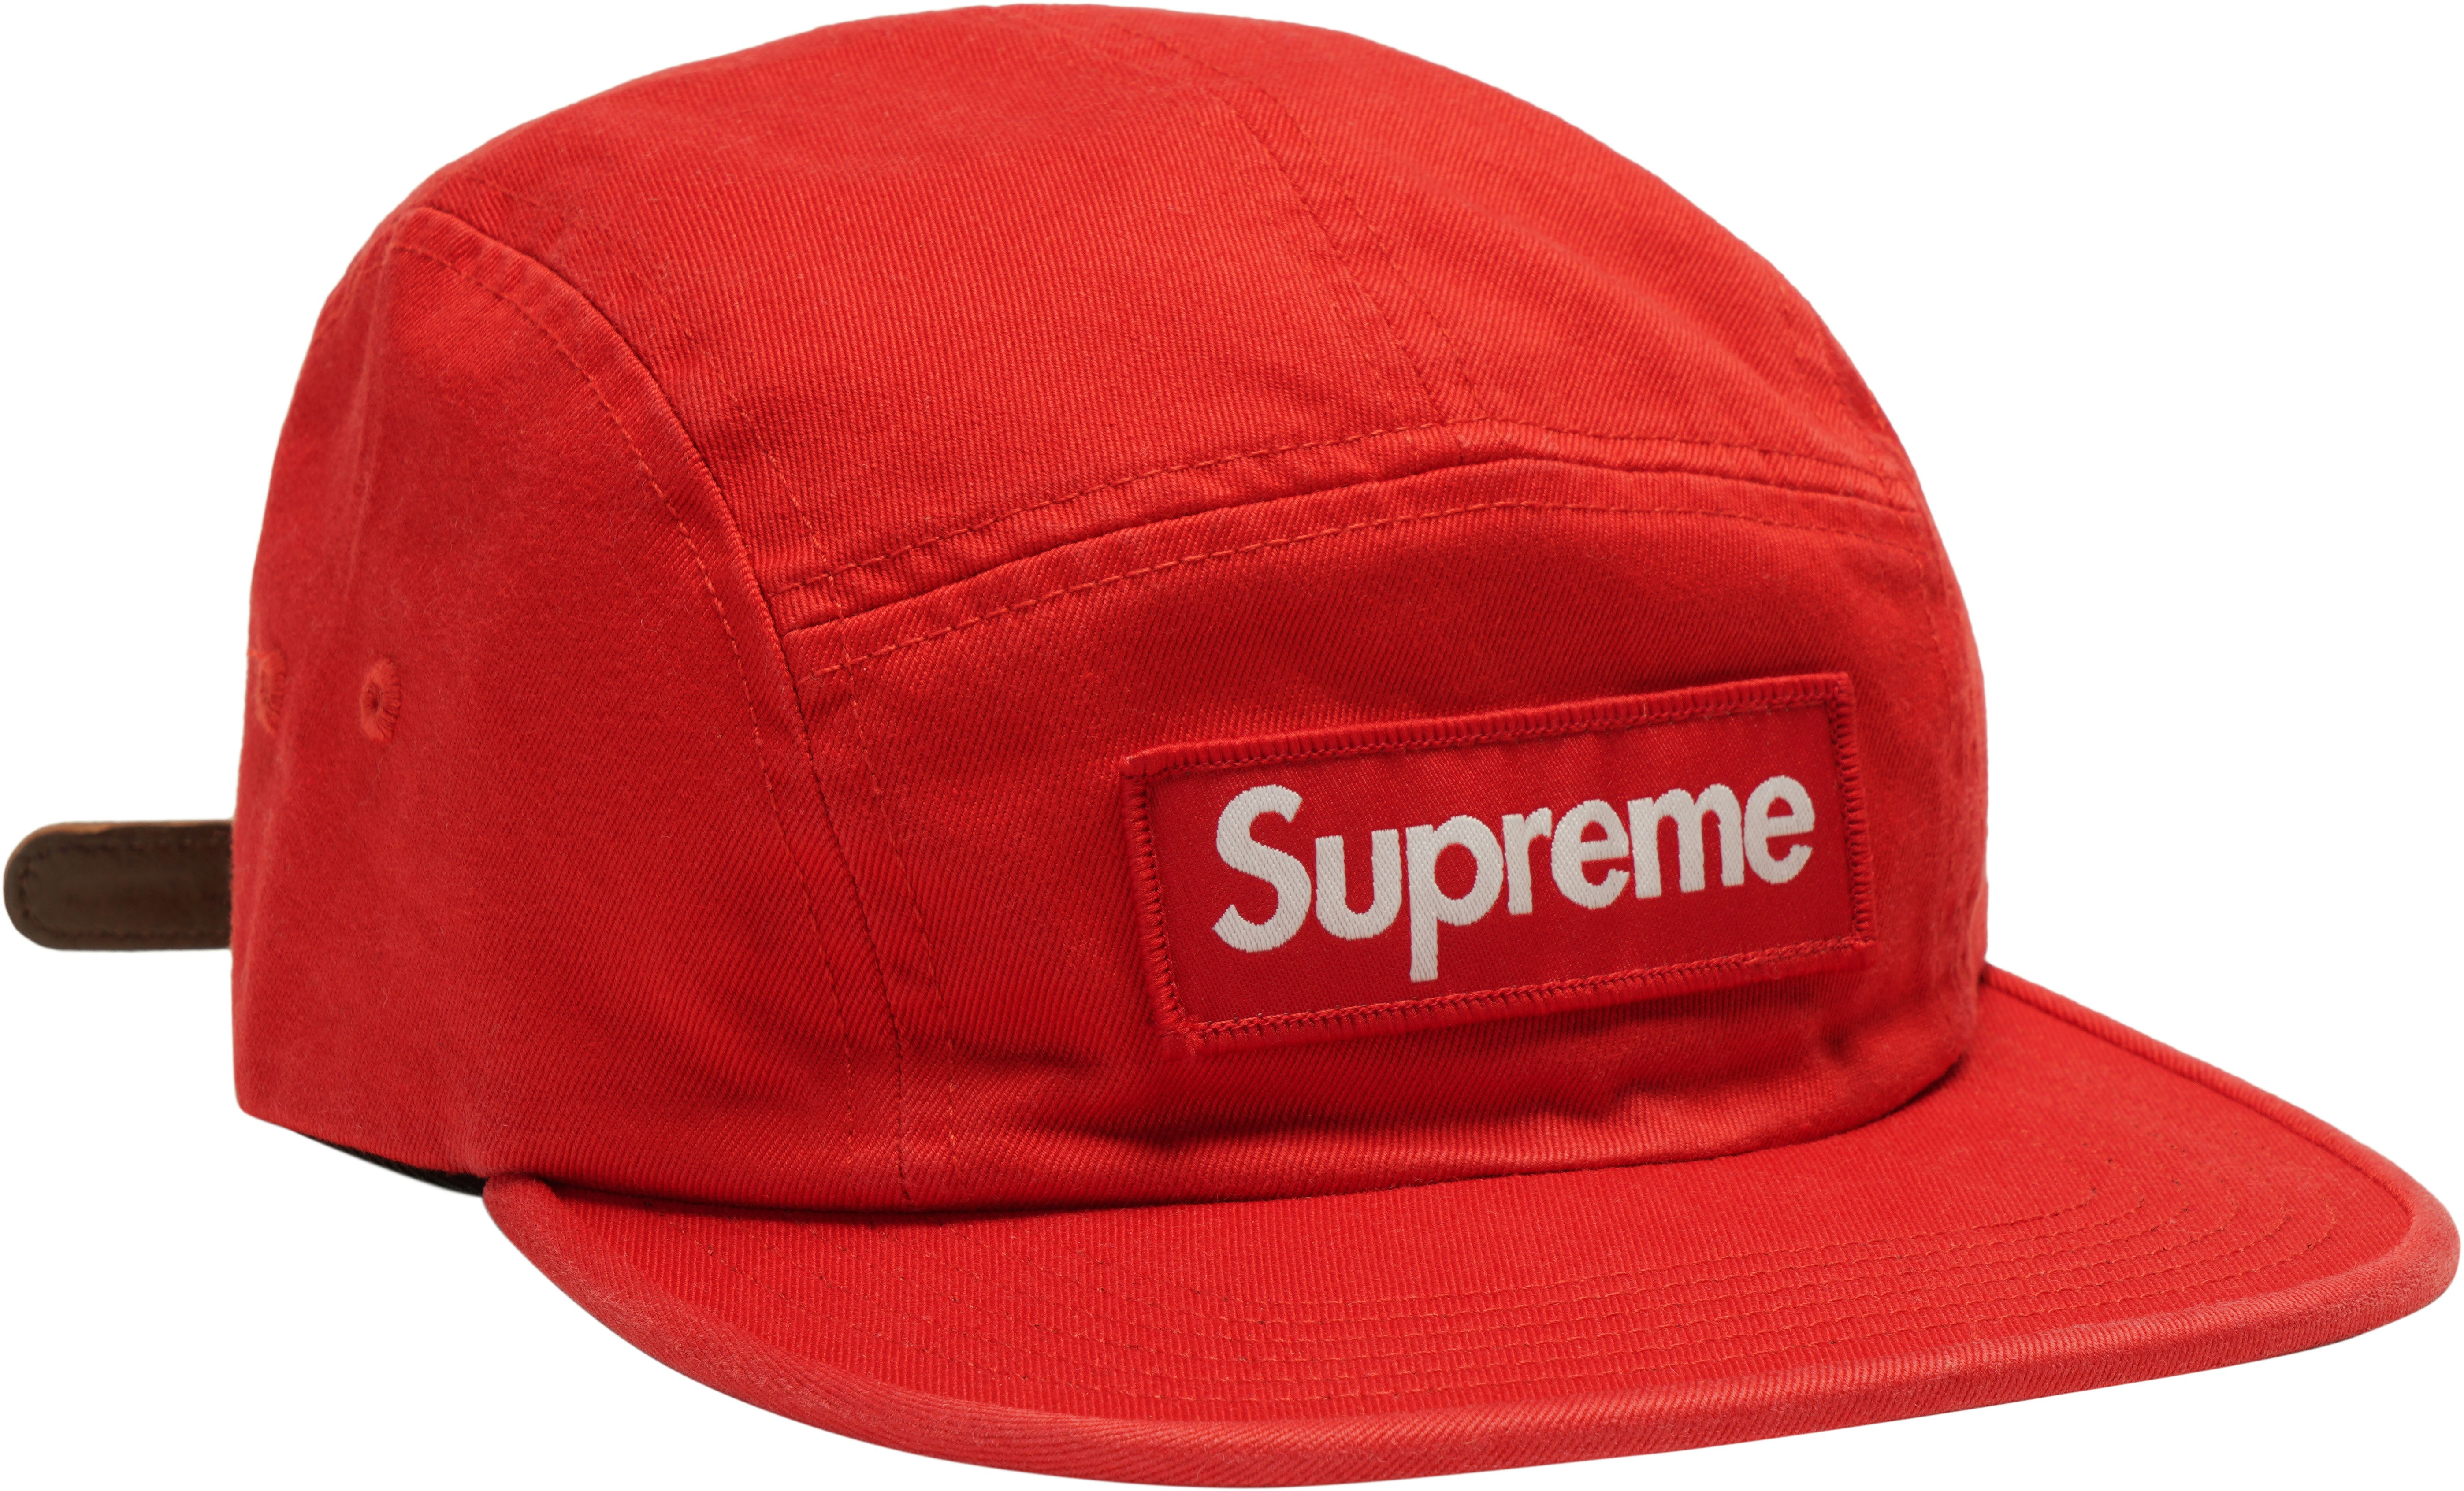 Supreme Washed Chino Twill Camp Cap FW18 Red - Novelship